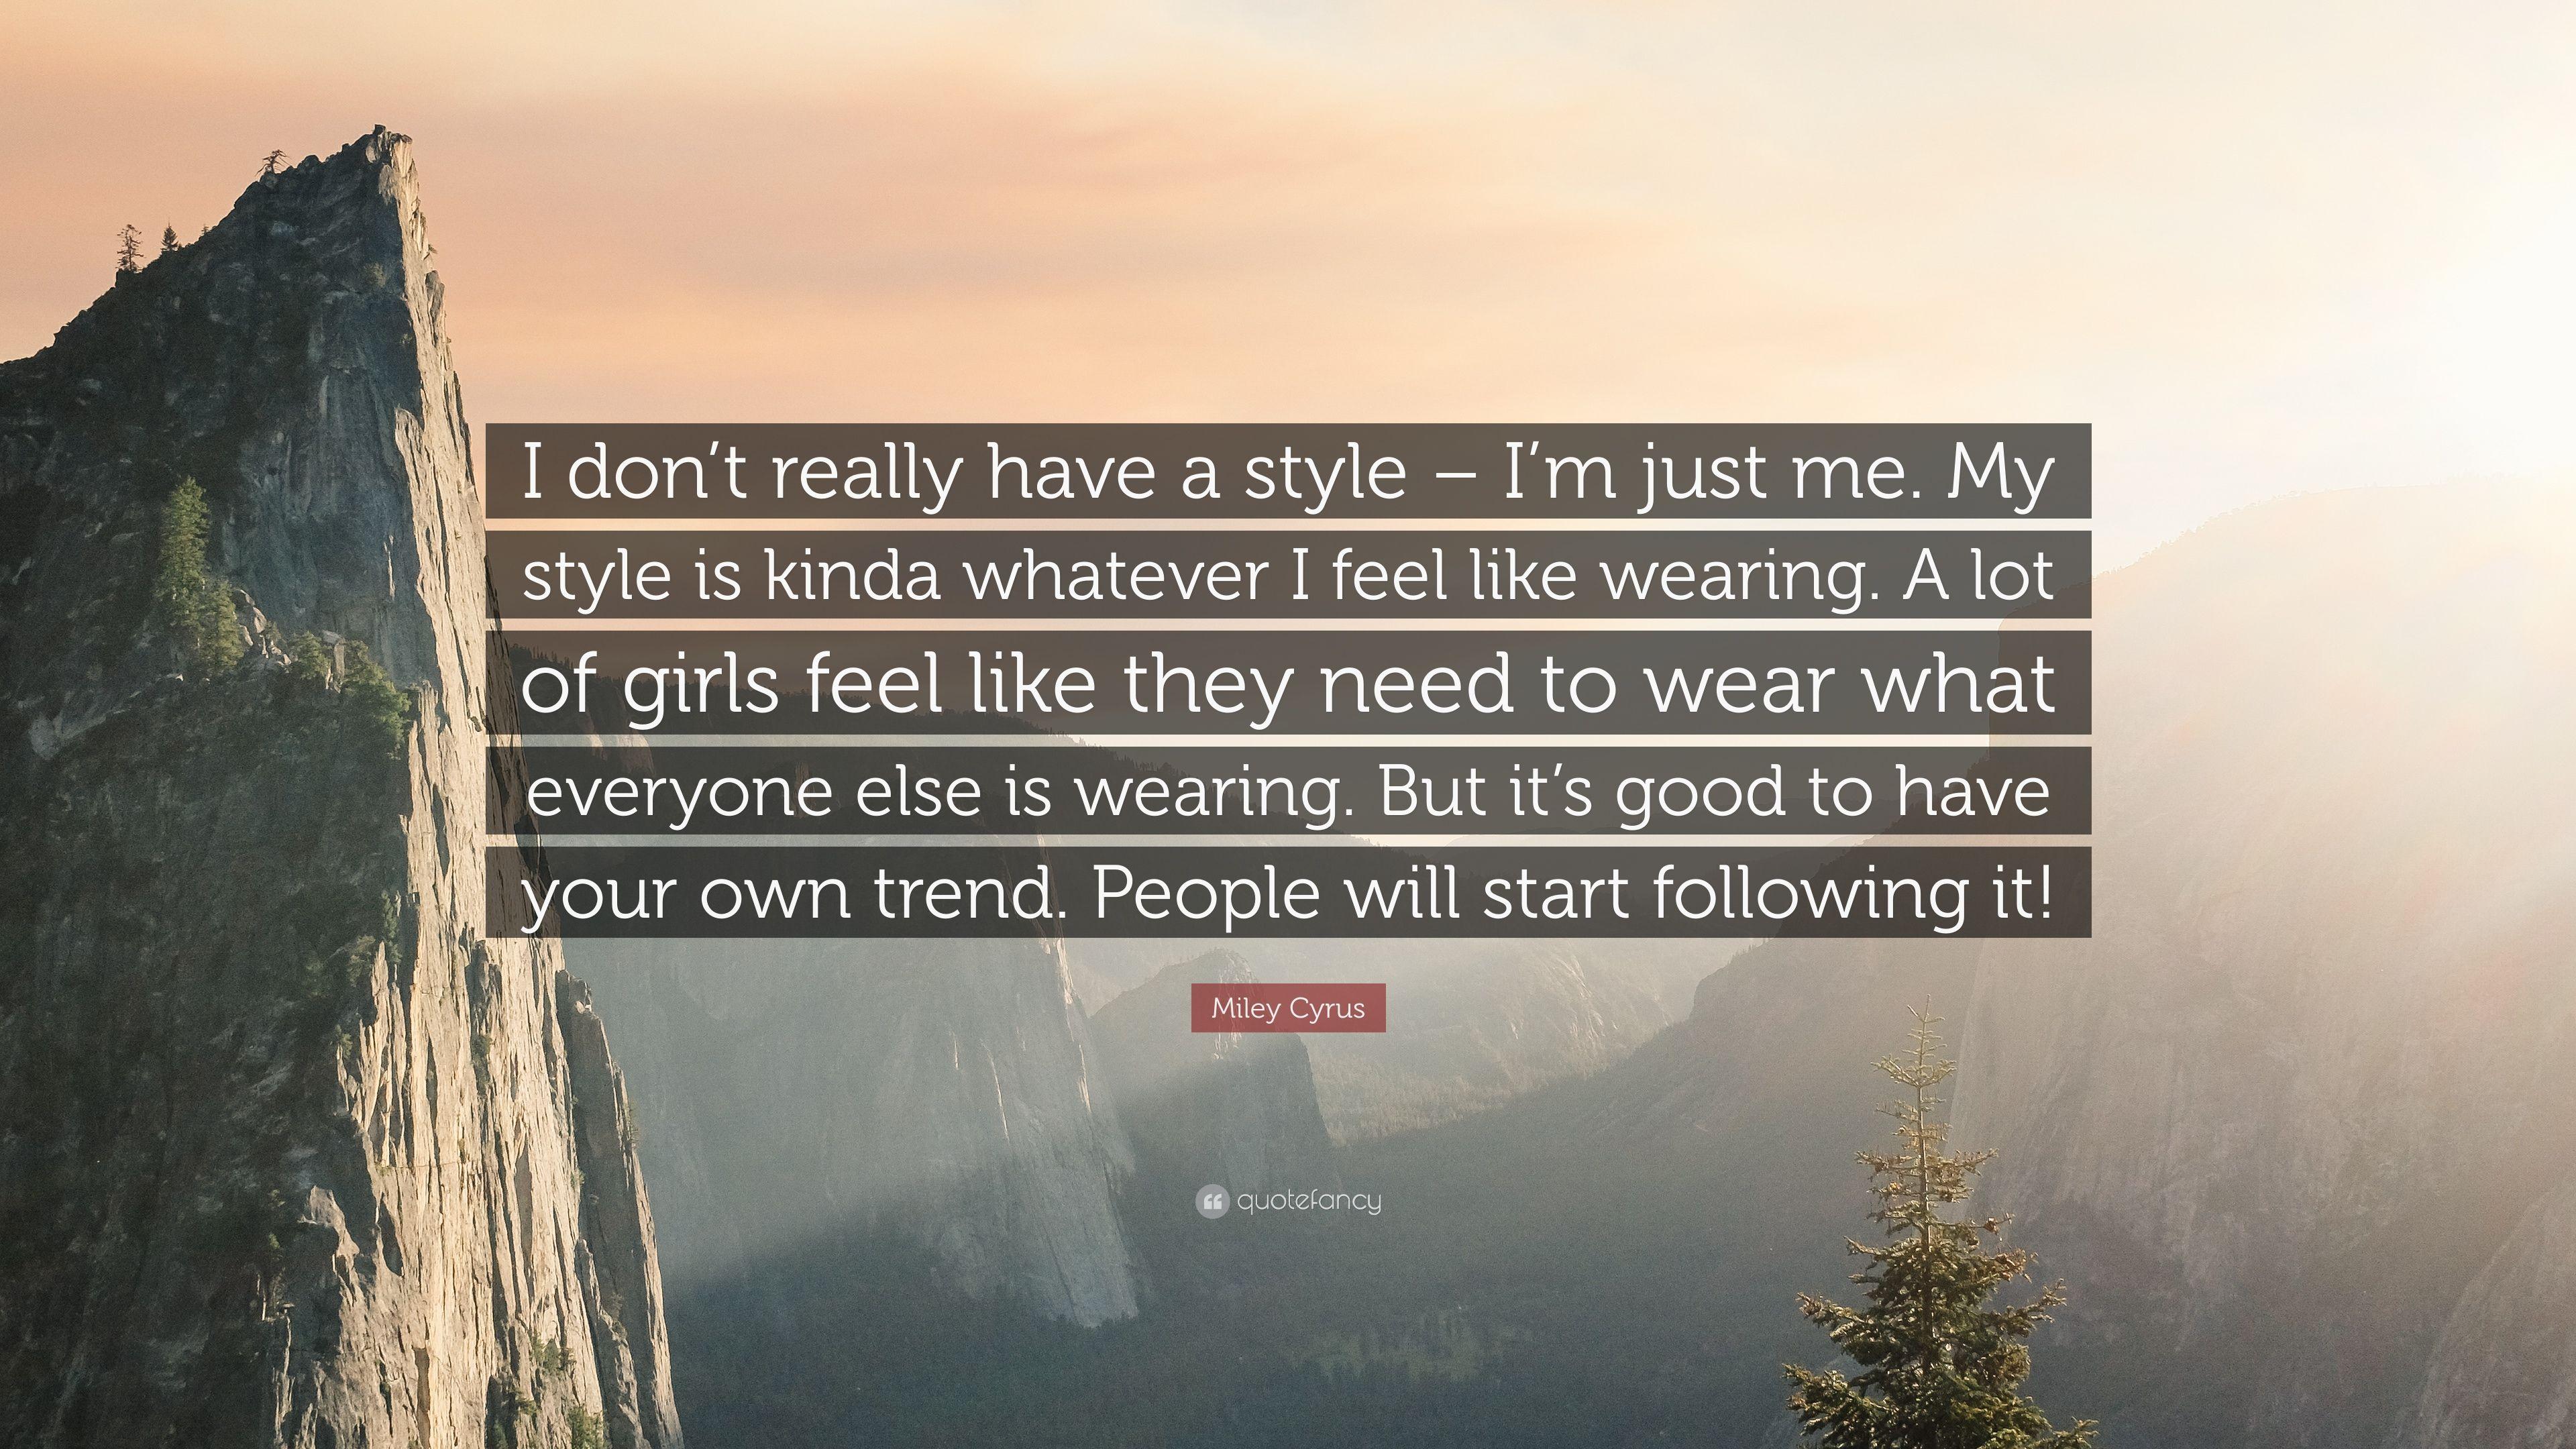 Miley Cyrus Quote: “I don't really have a style